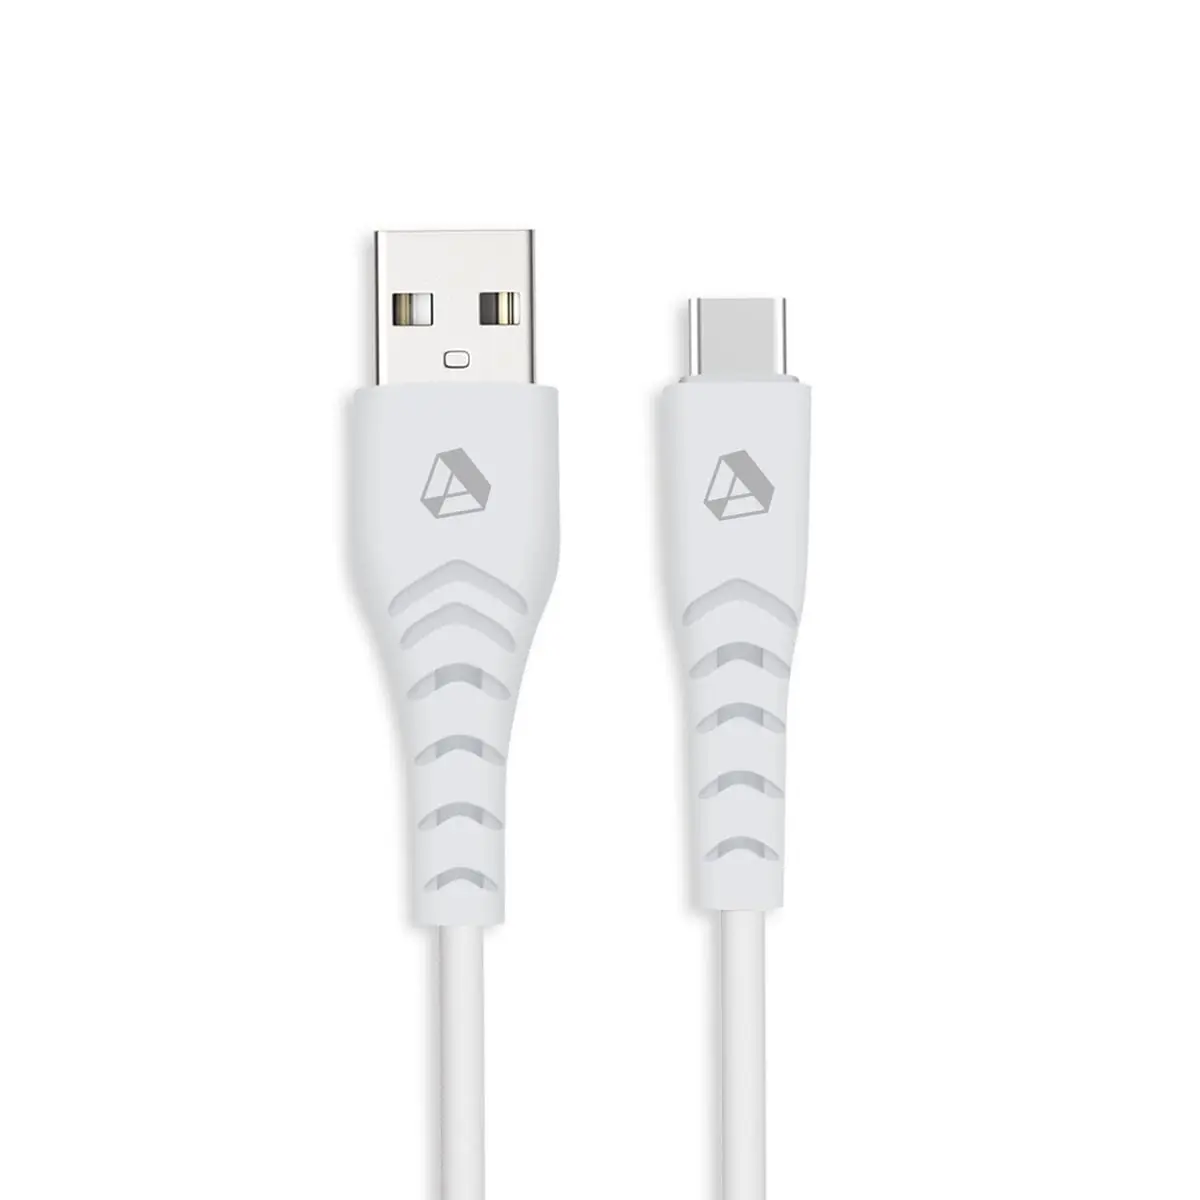 Eco-friendly USB-A to USB-C Cable - 1.5m: A Sustainable Solution for Your Charging Needs